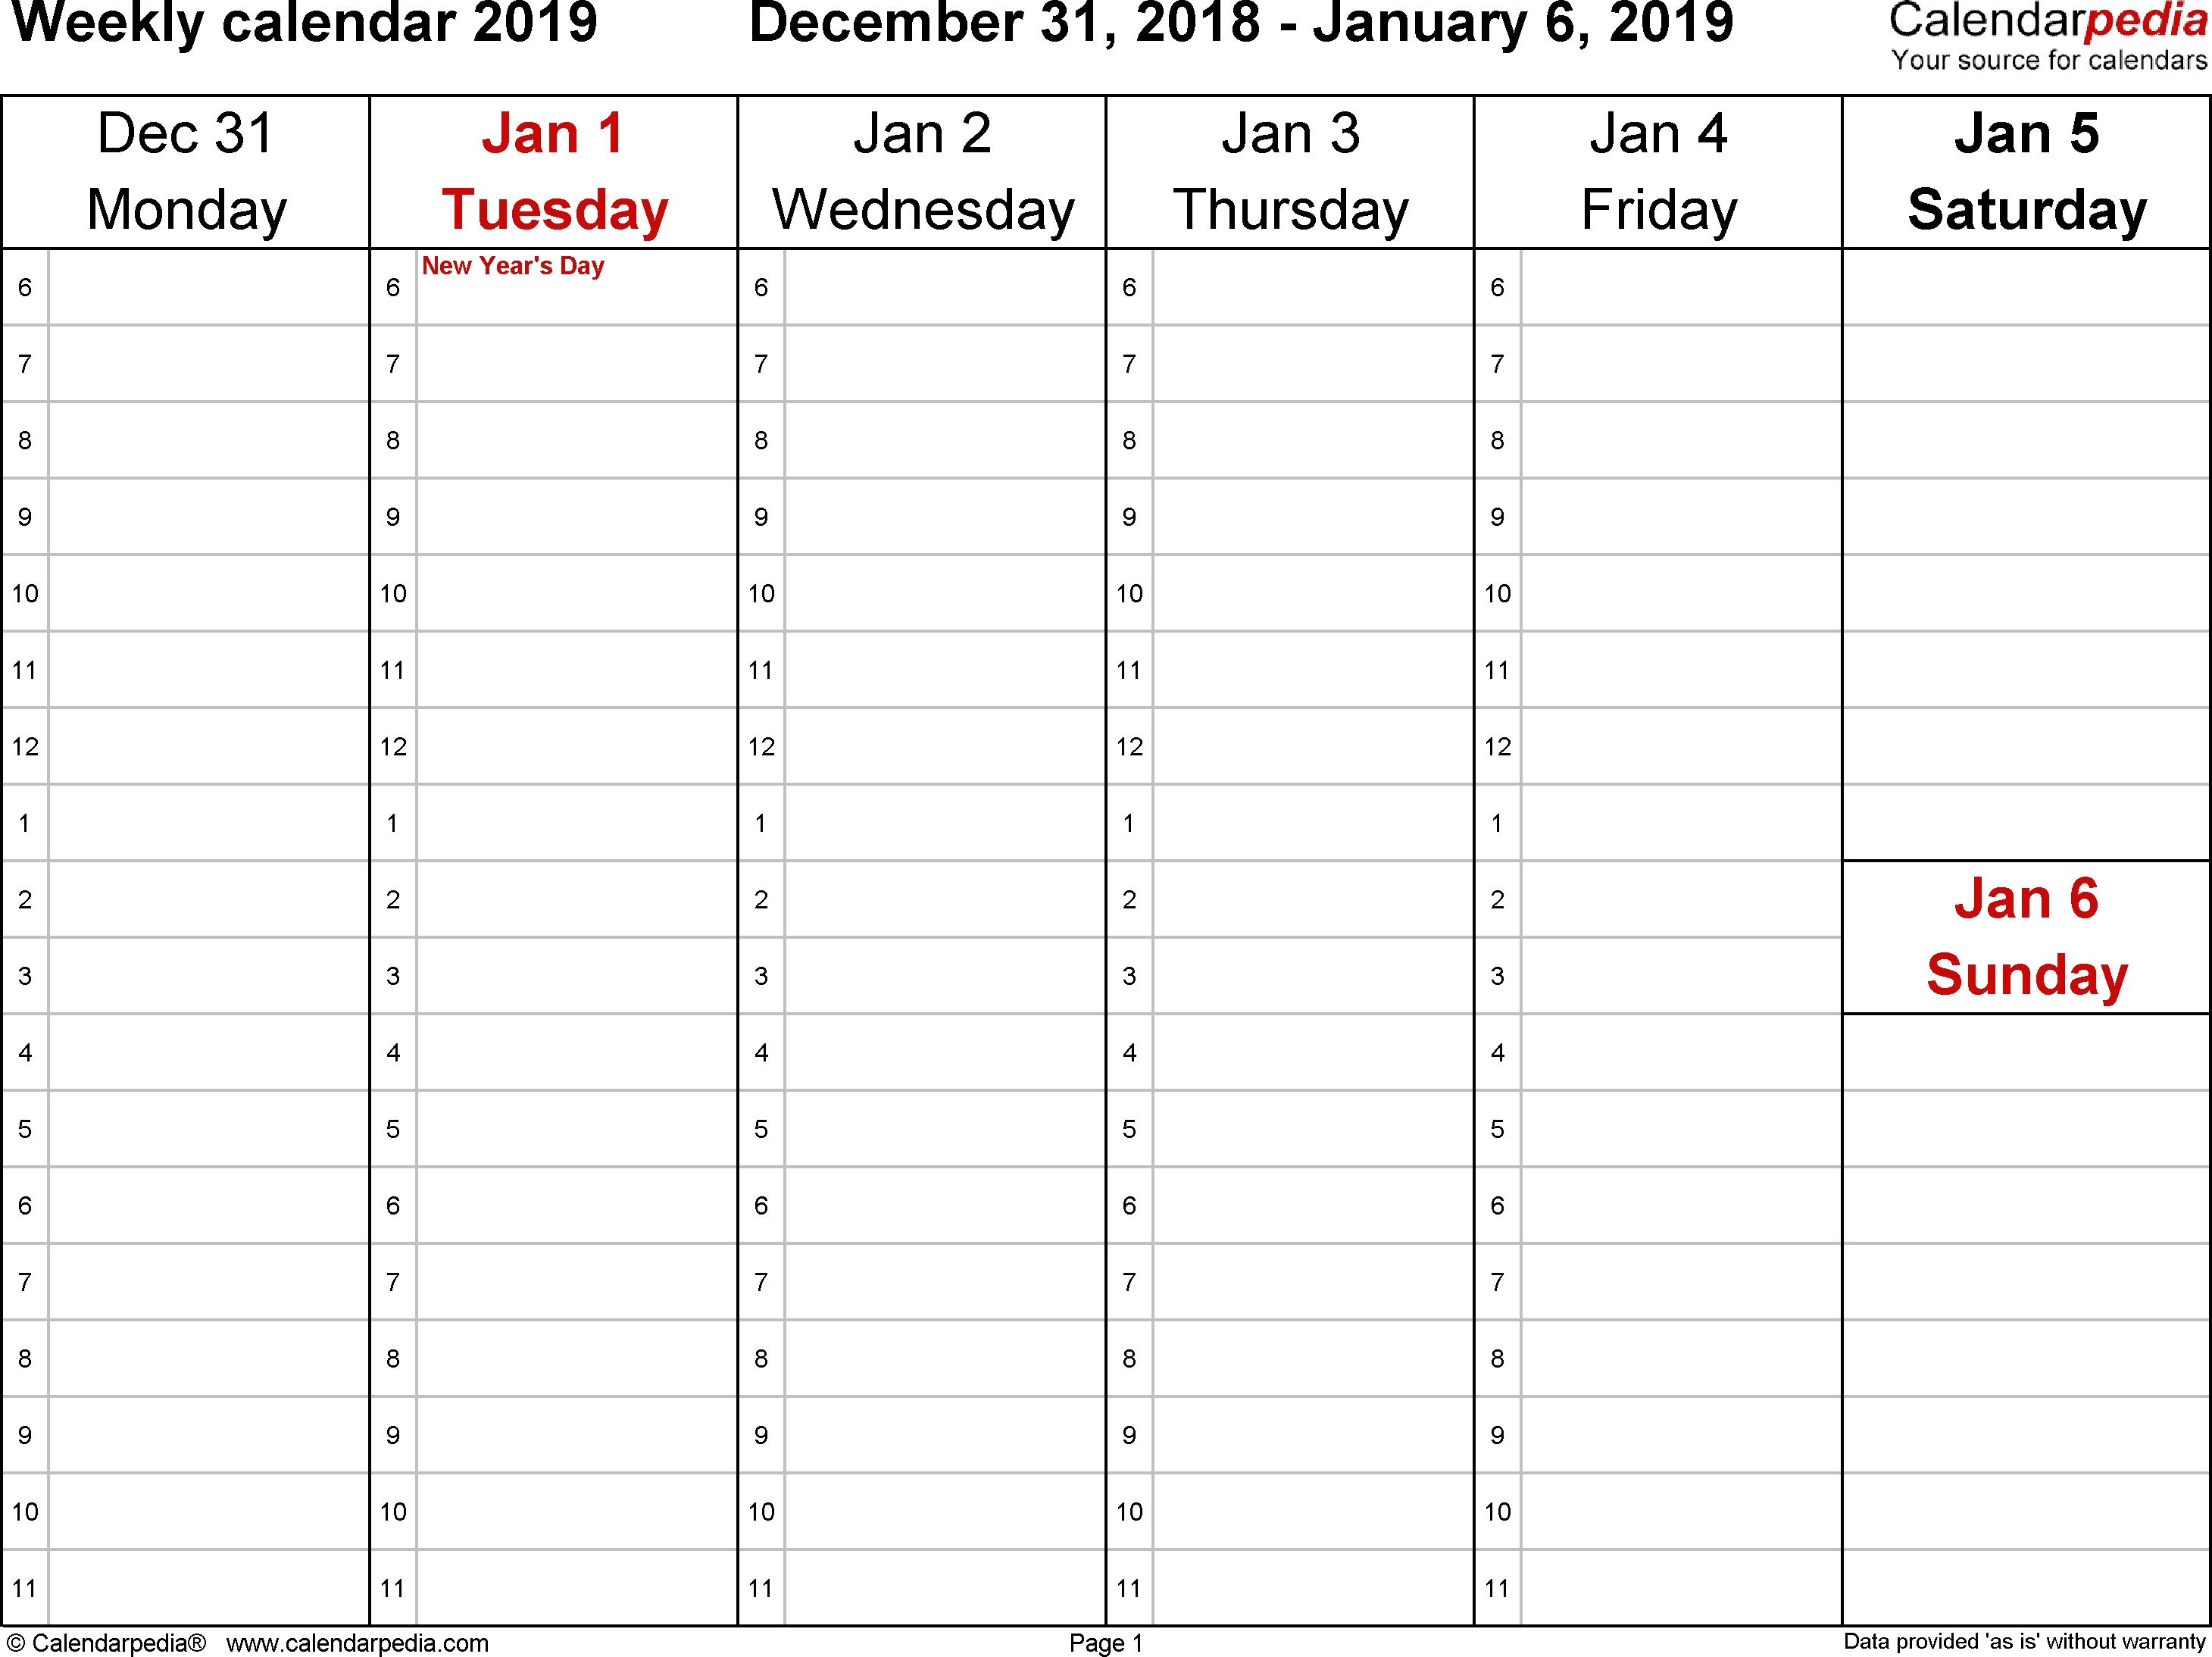 Weekly Calendar 2019 For Word - 12 Free Printable Templates with Free Printable Weekly Calendar Page With Notes Sections